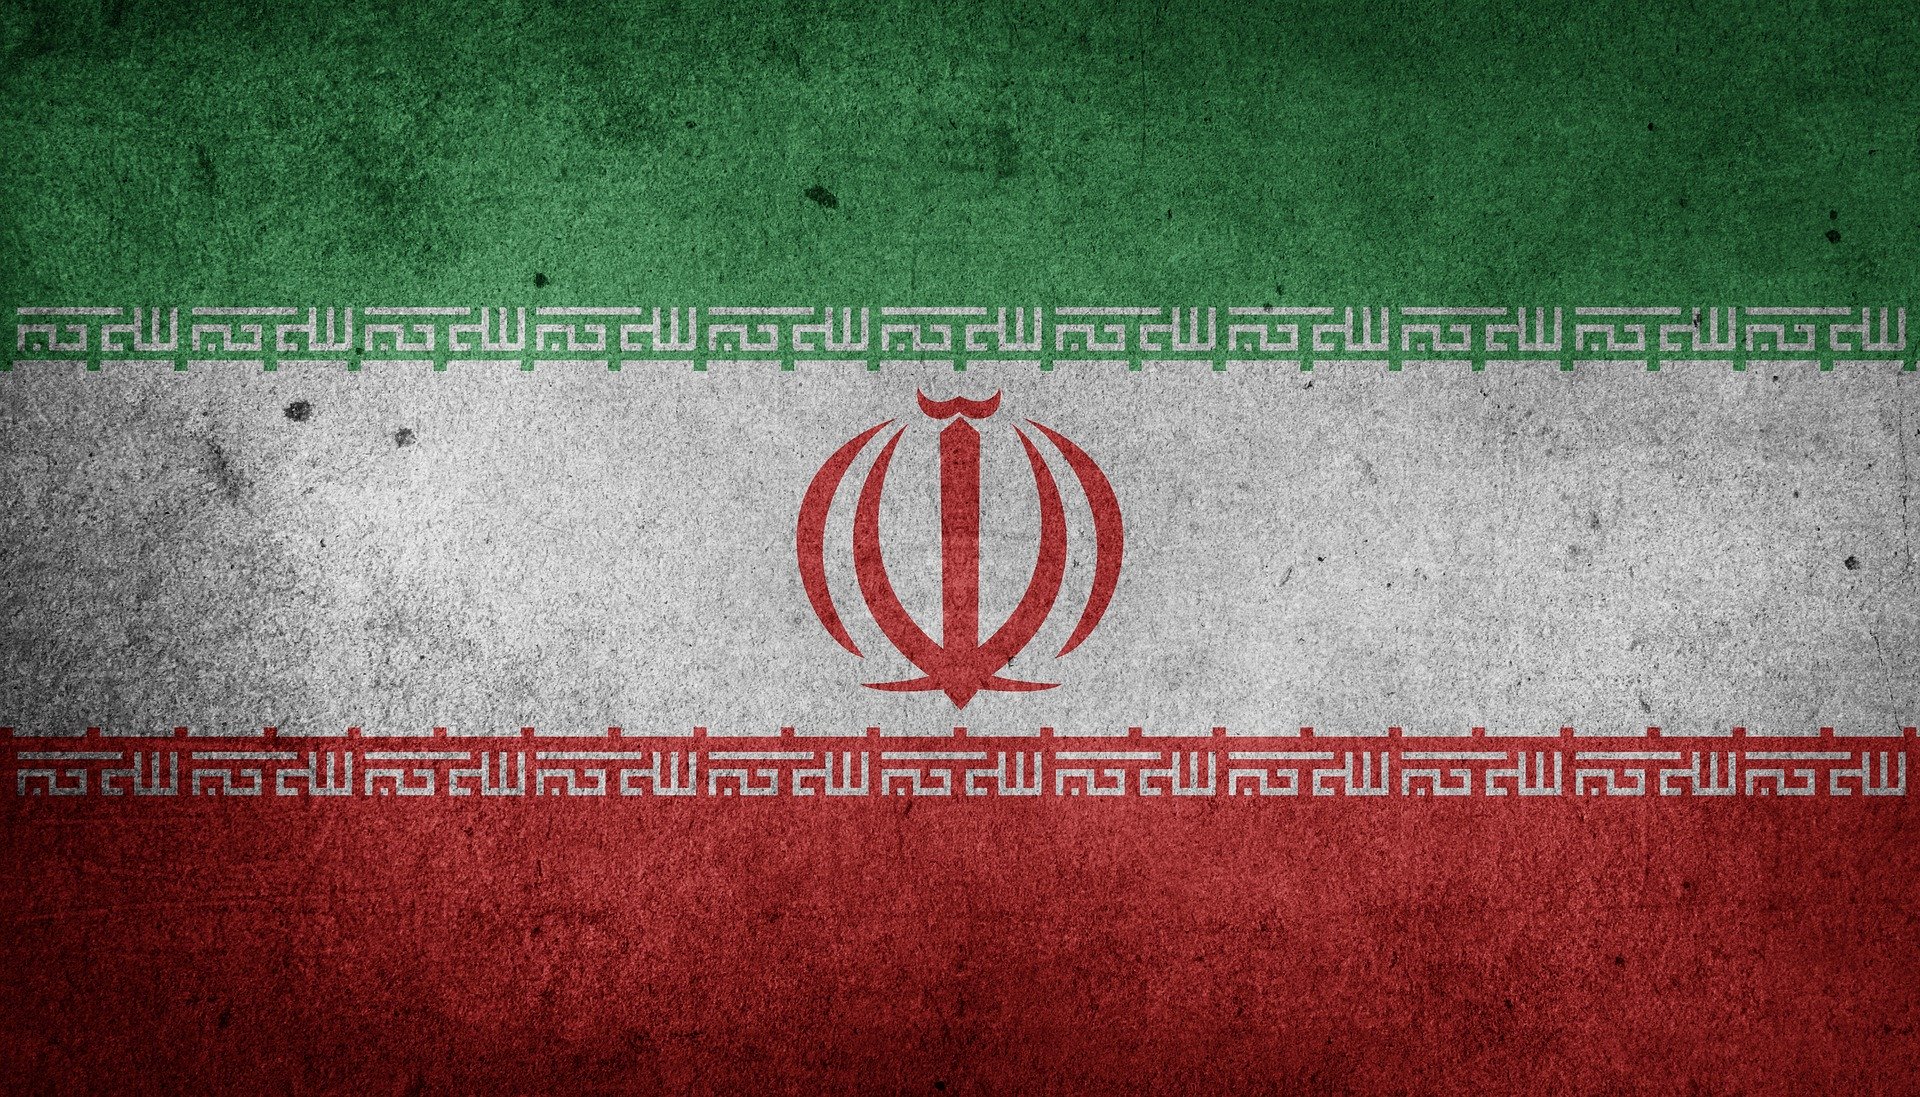 U.S. Government Issues Warning About Possible Iranian Cyberattacks